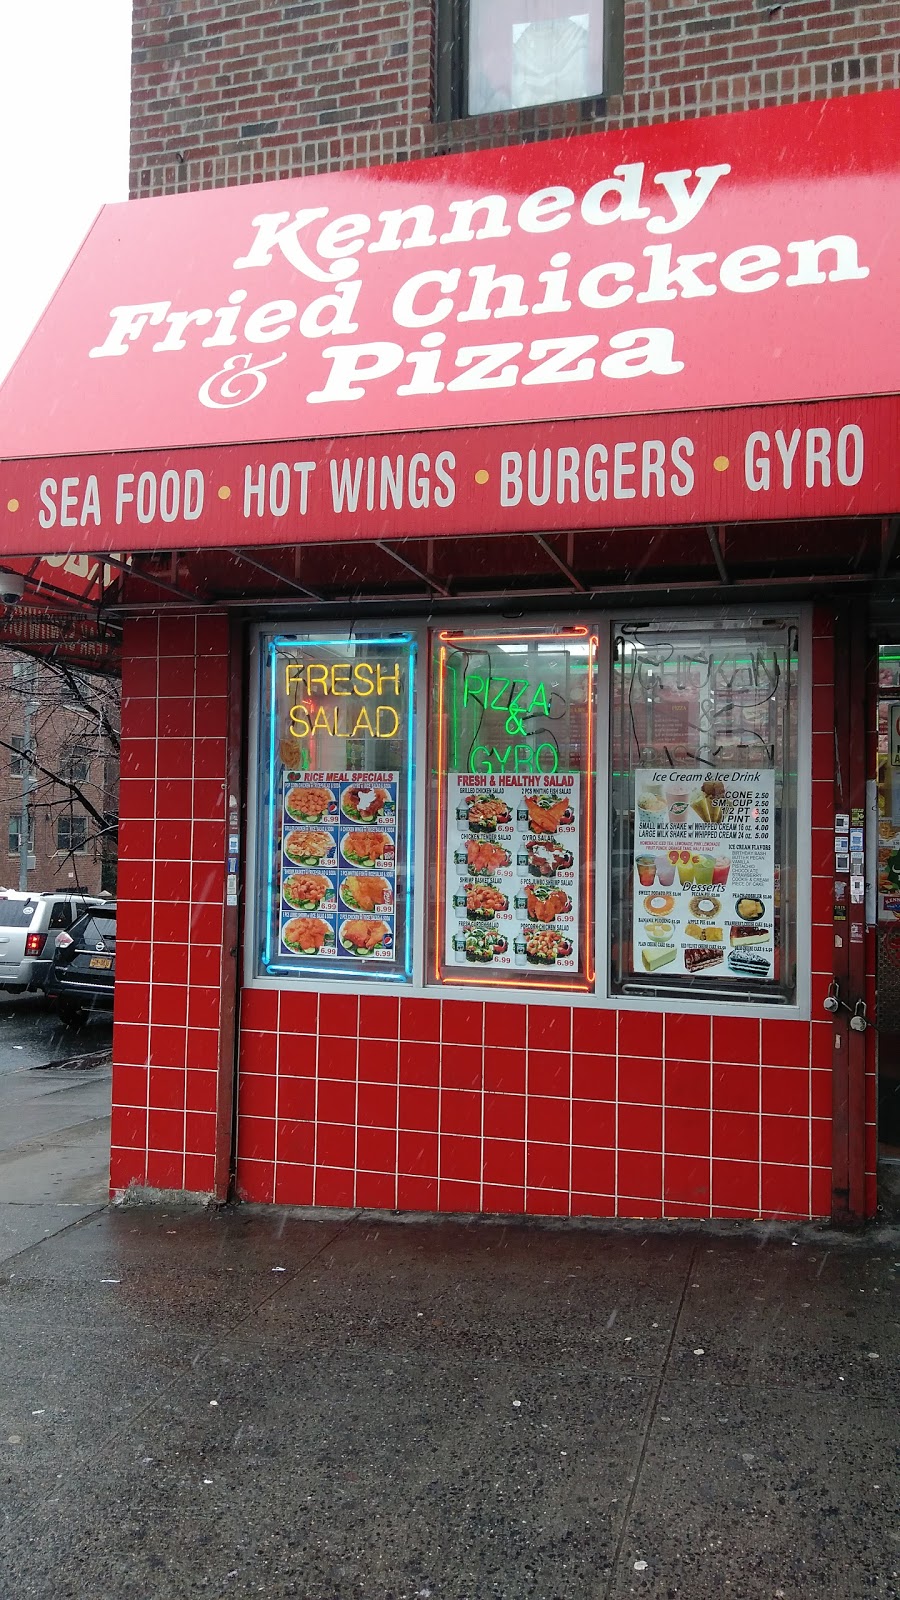 Kennedy Fried Chicken | 218 E 165th St, The Bronx, NY 10456 | Phone: (718) 588-5780